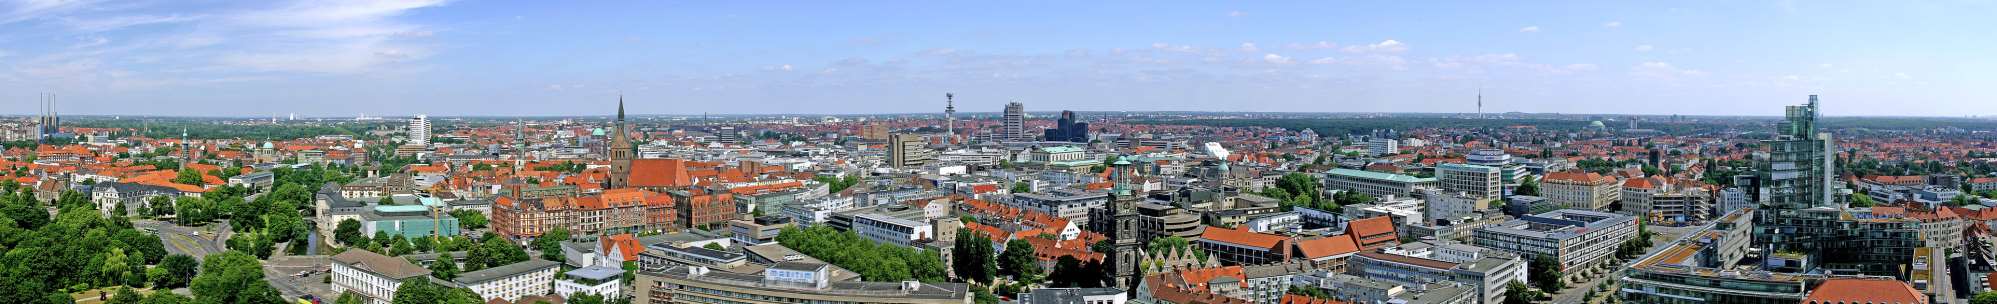 Immobilienvideo Hannover